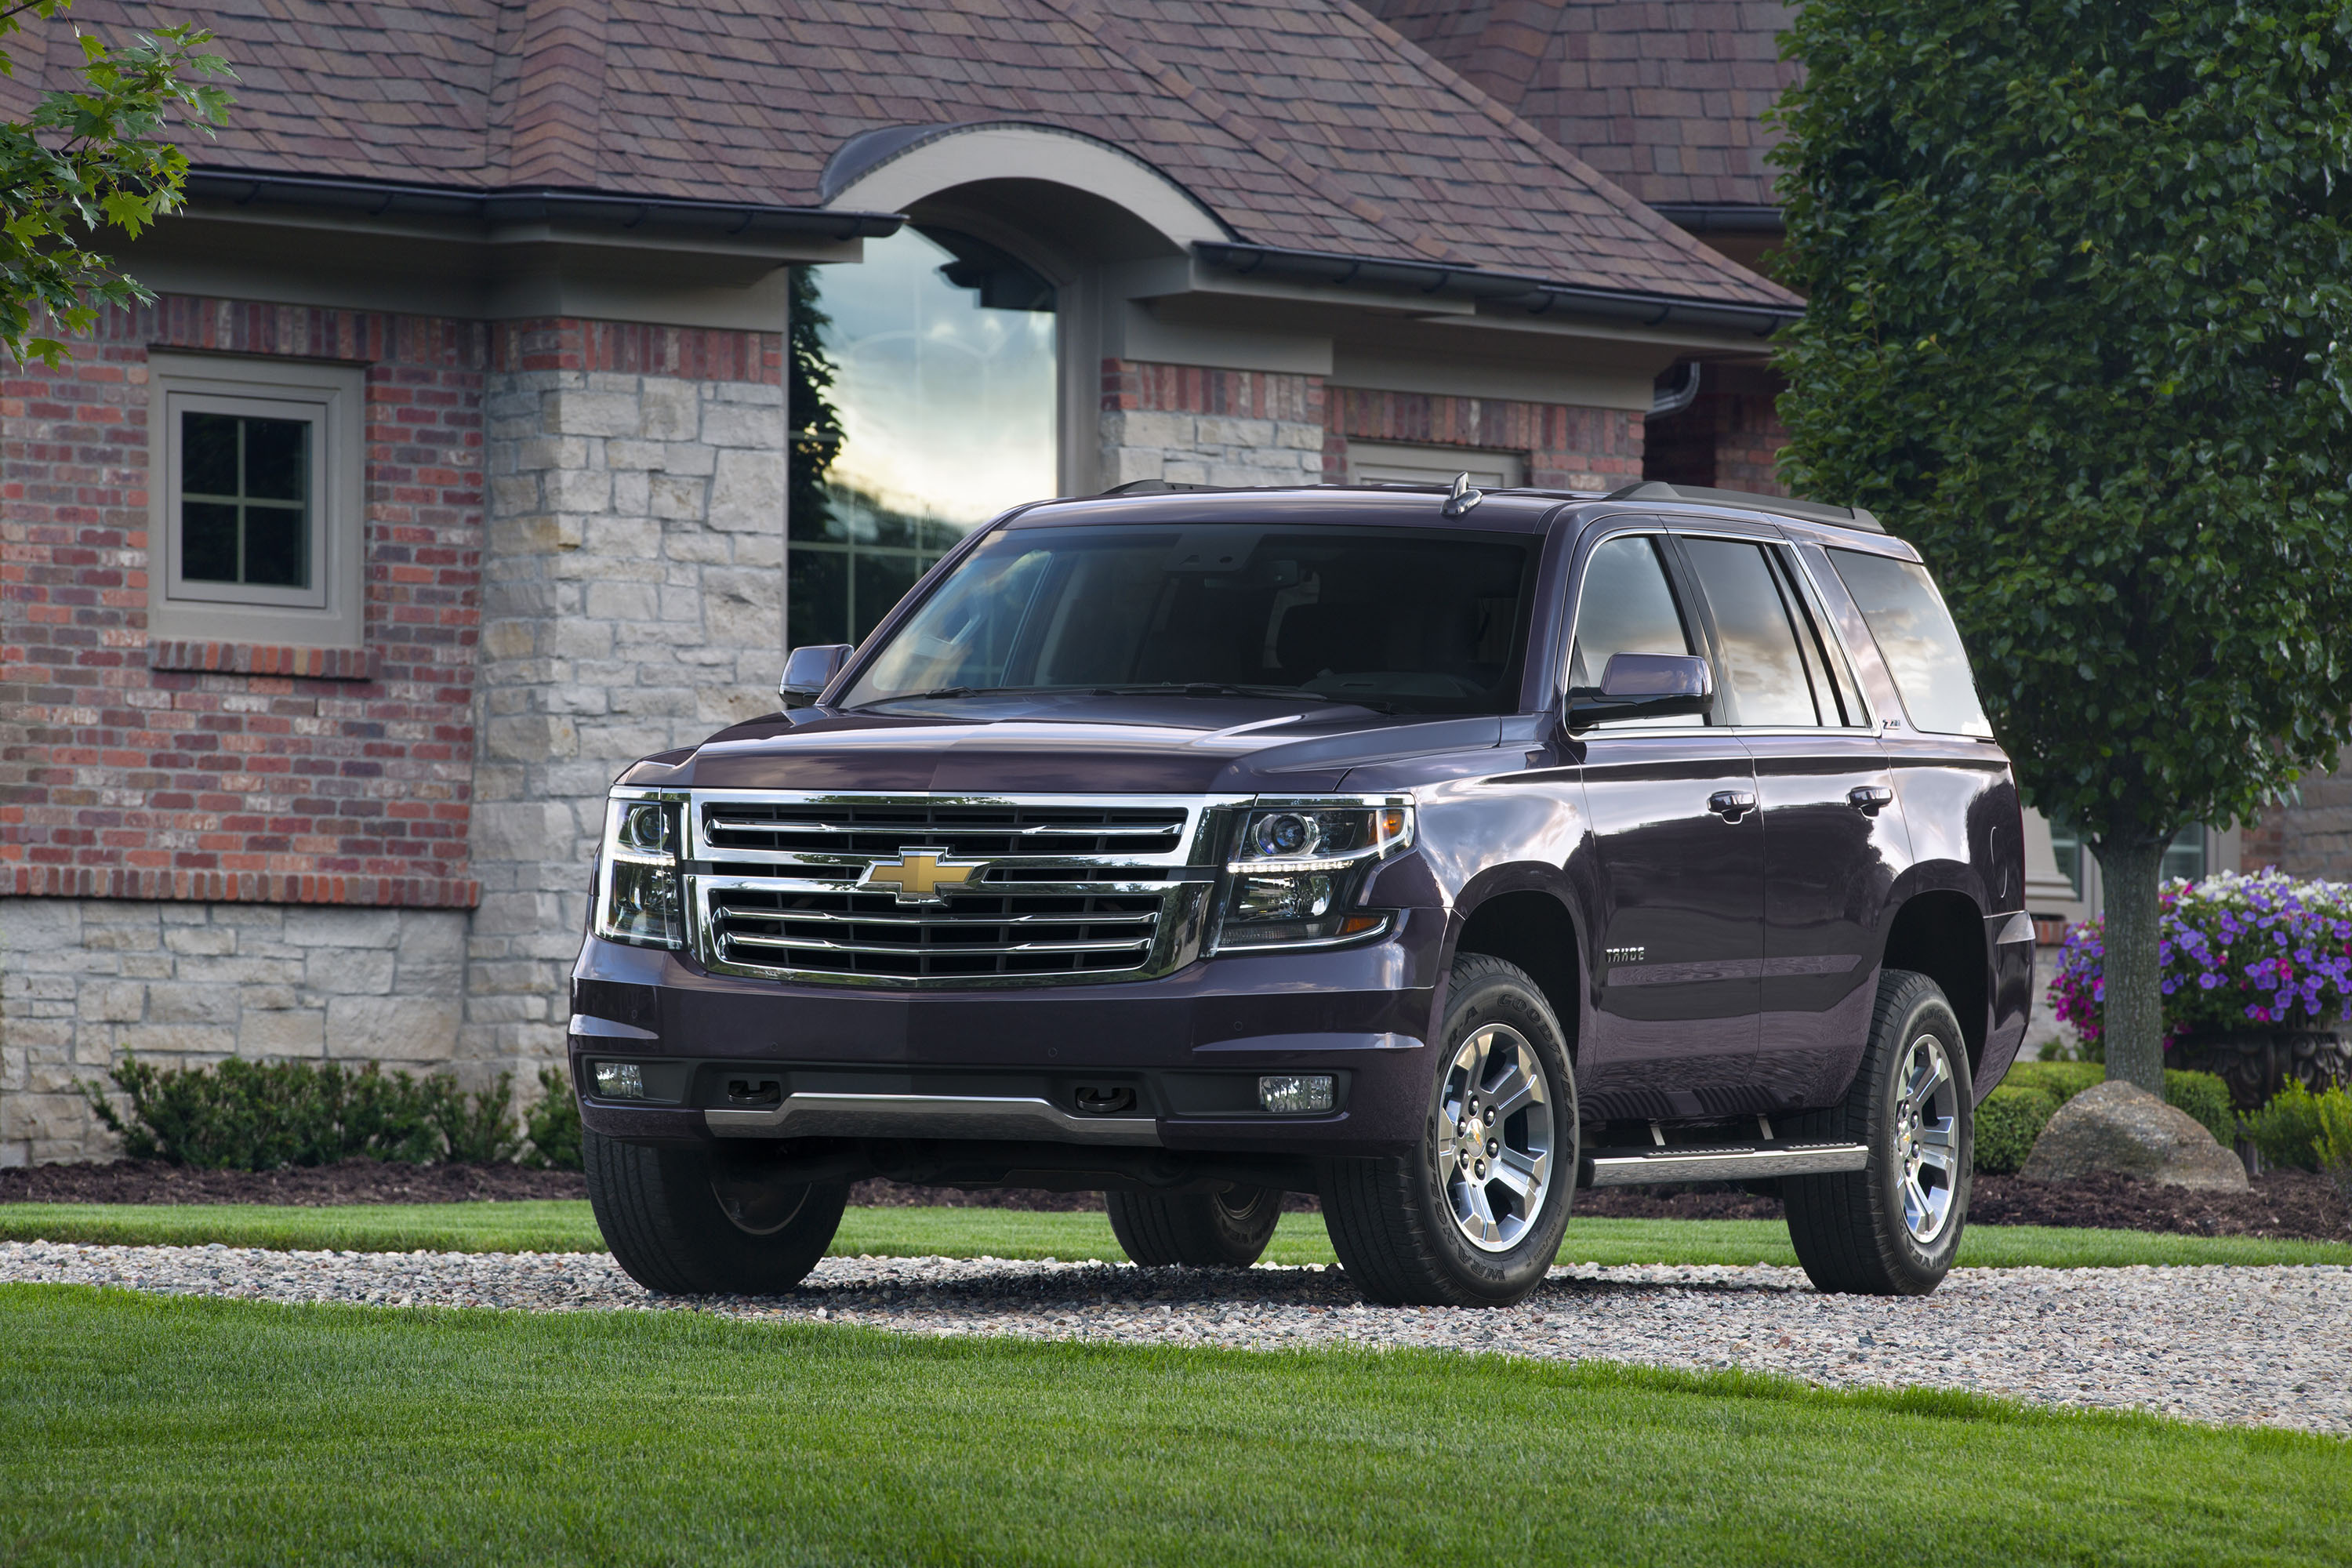 2013 Chevy Tahoe Towing Capacity Chart